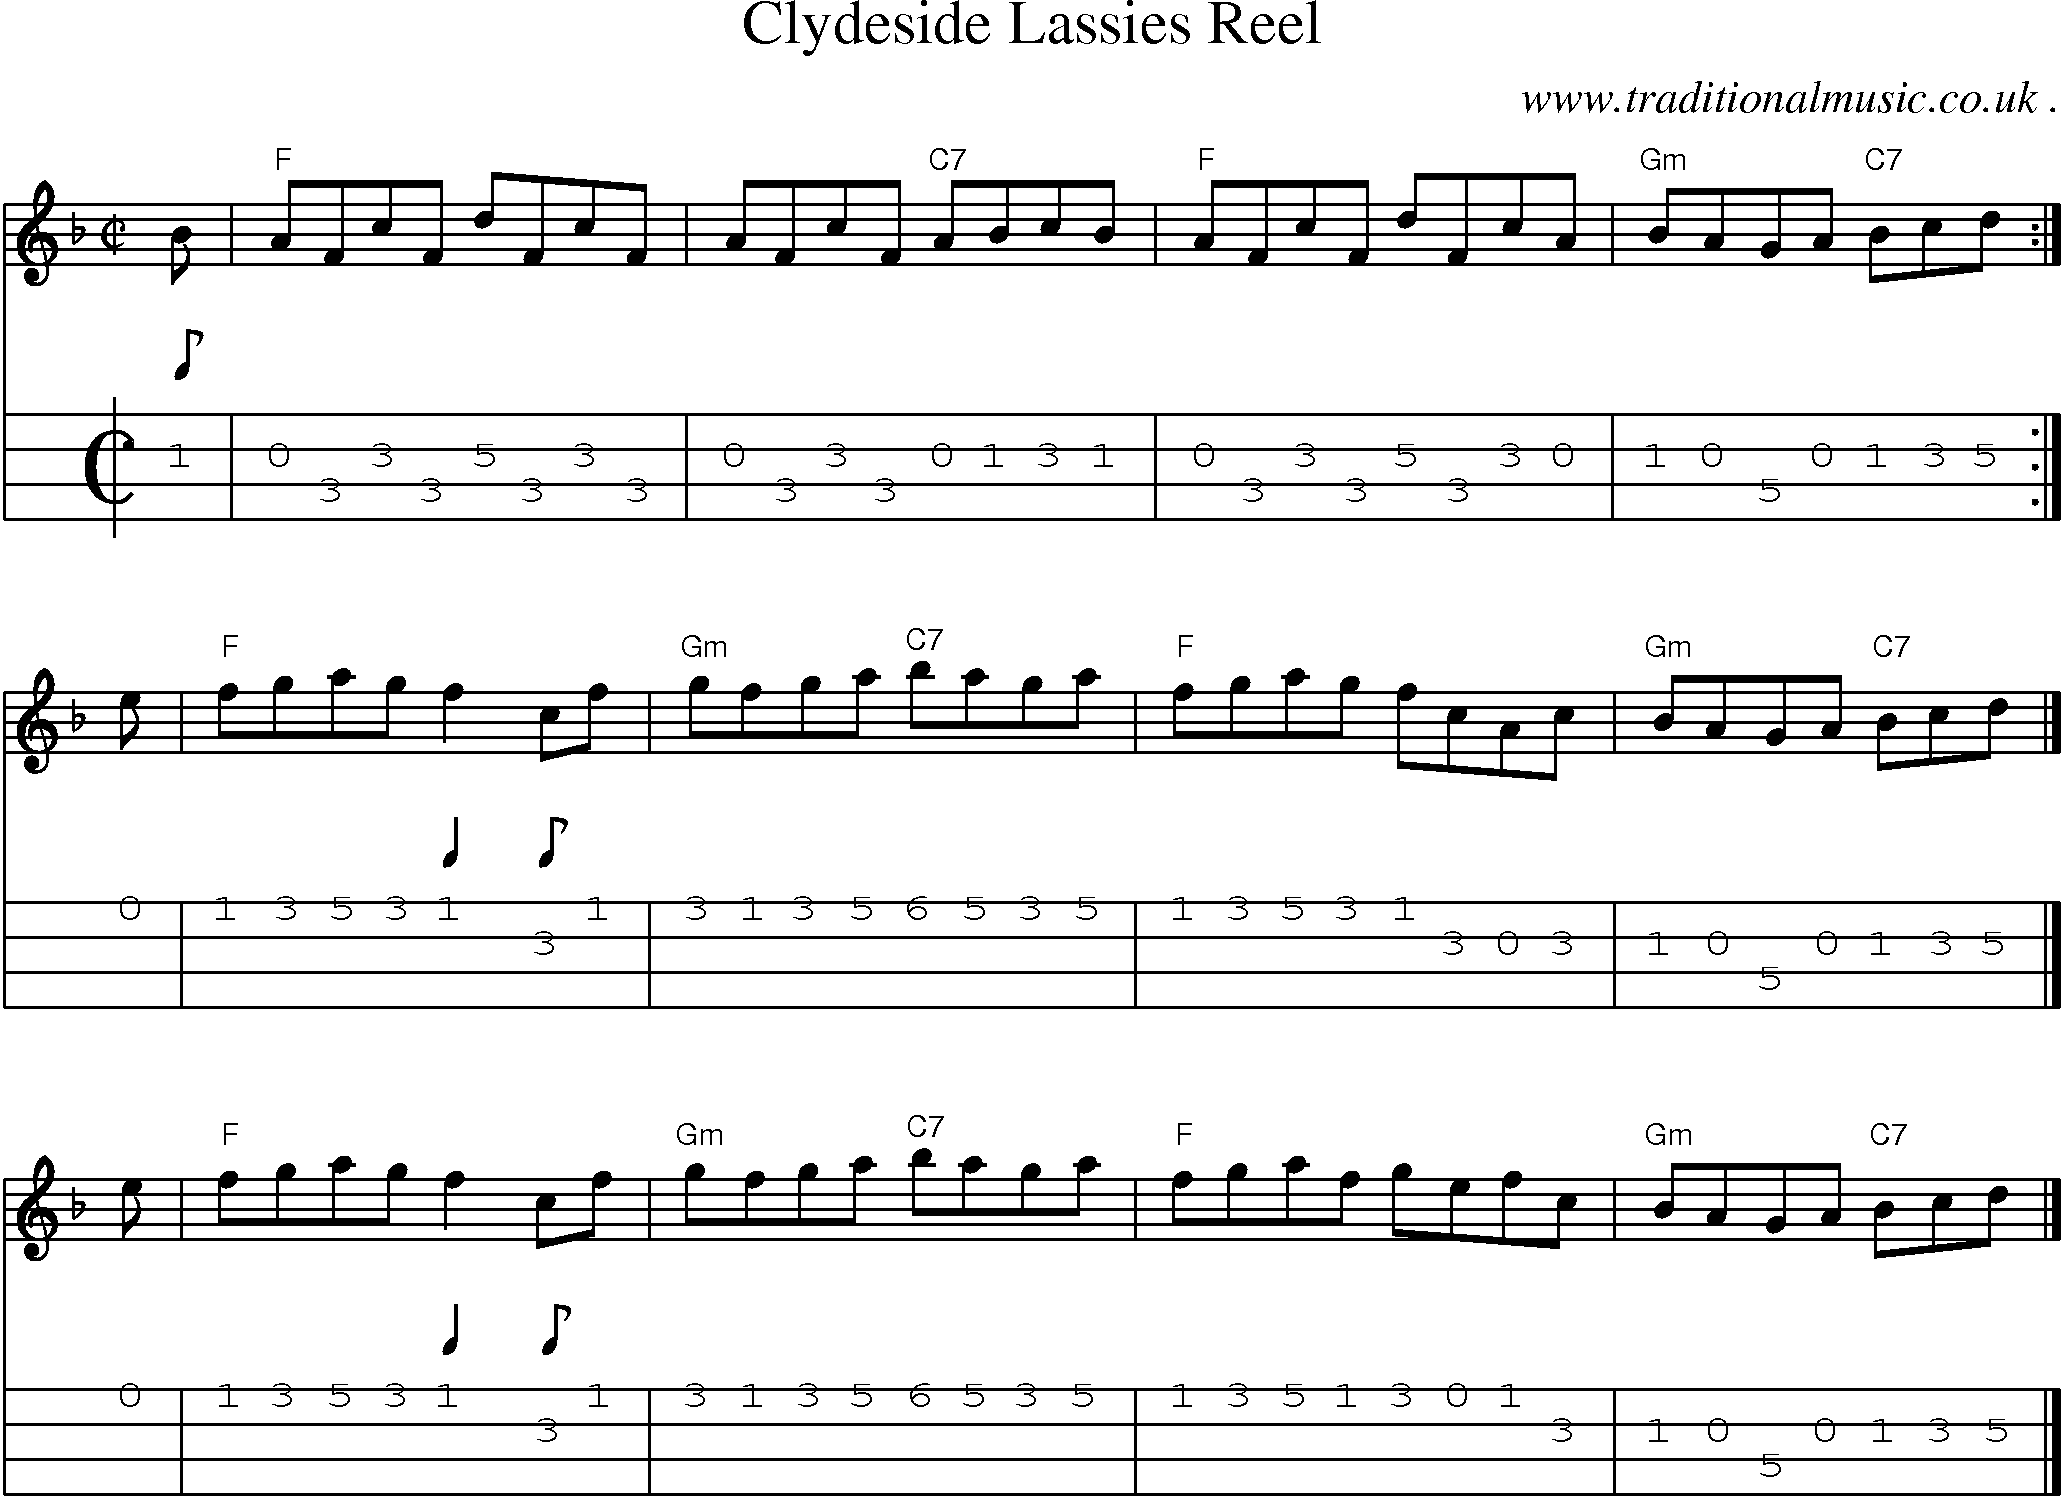 Sheet-music  score, Chords and Mandolin Tabs for Clydeside Lassies Reel